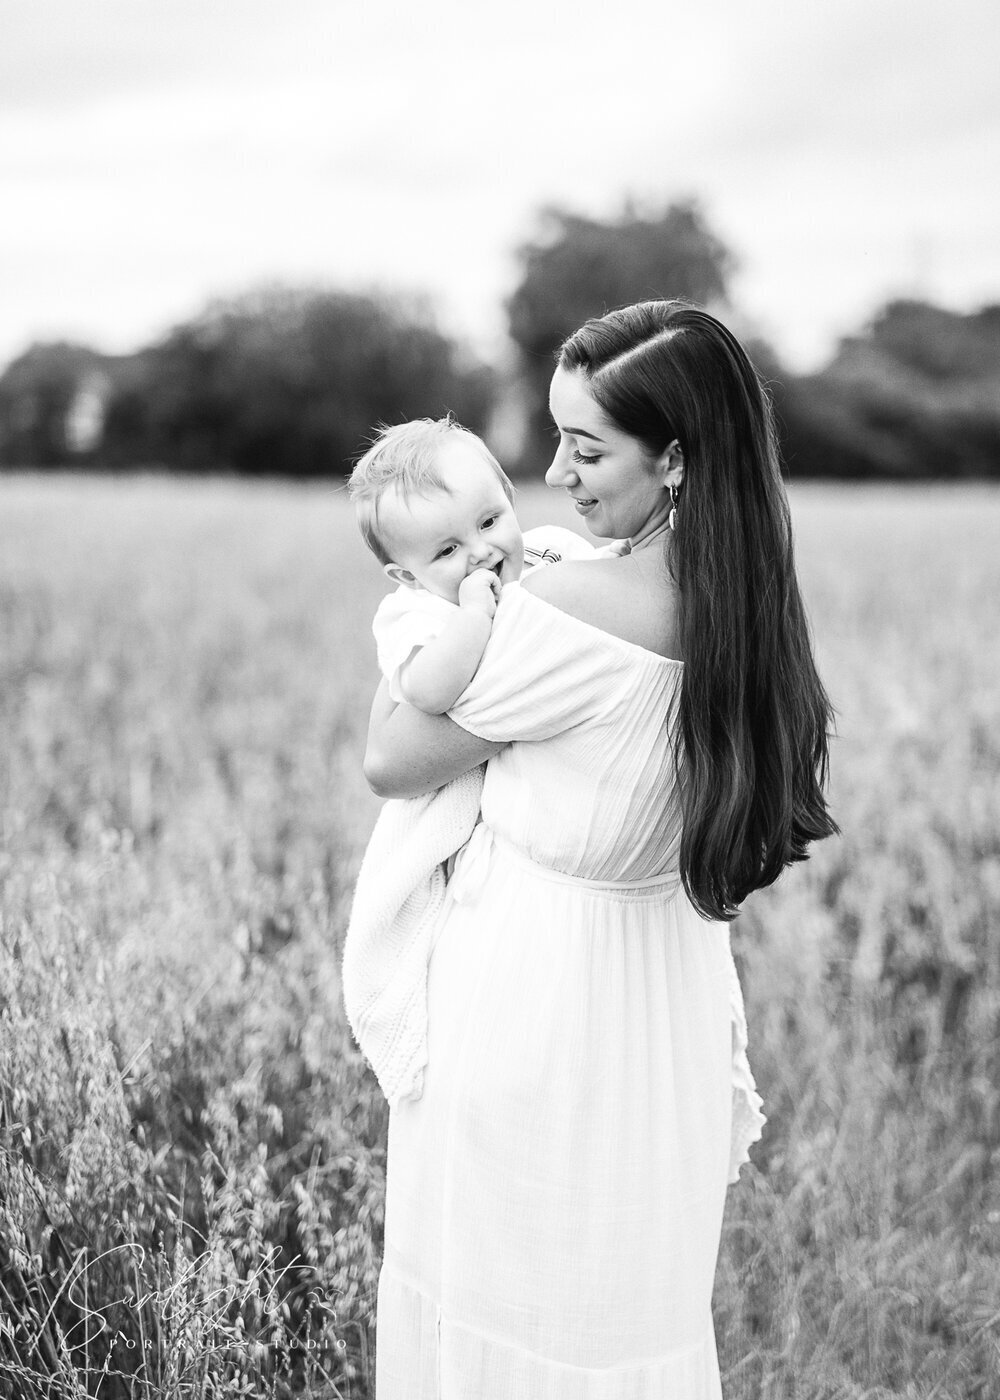 Older baby photography in Bristol fields as woman holds baby